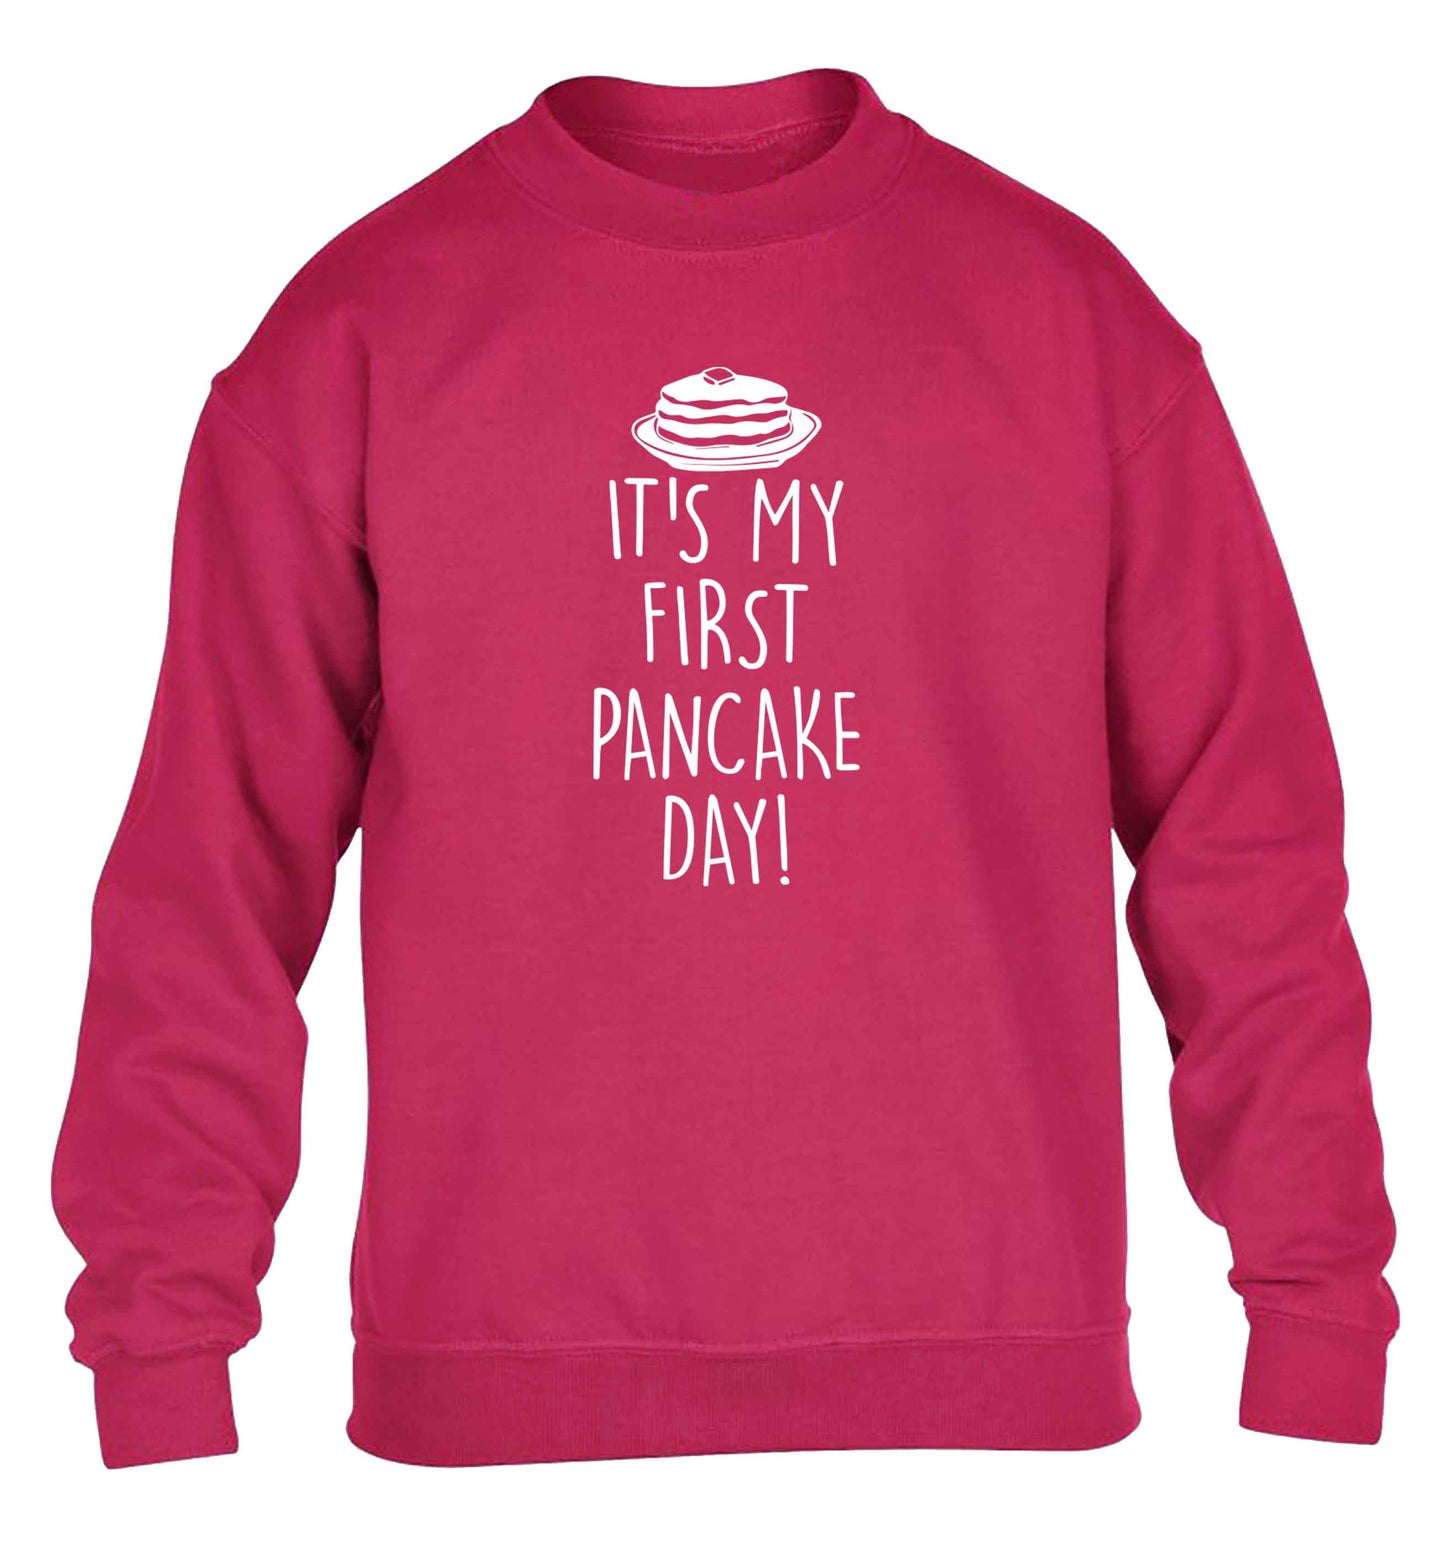 It's my first pancake day children's pink sweater 12-13 Years